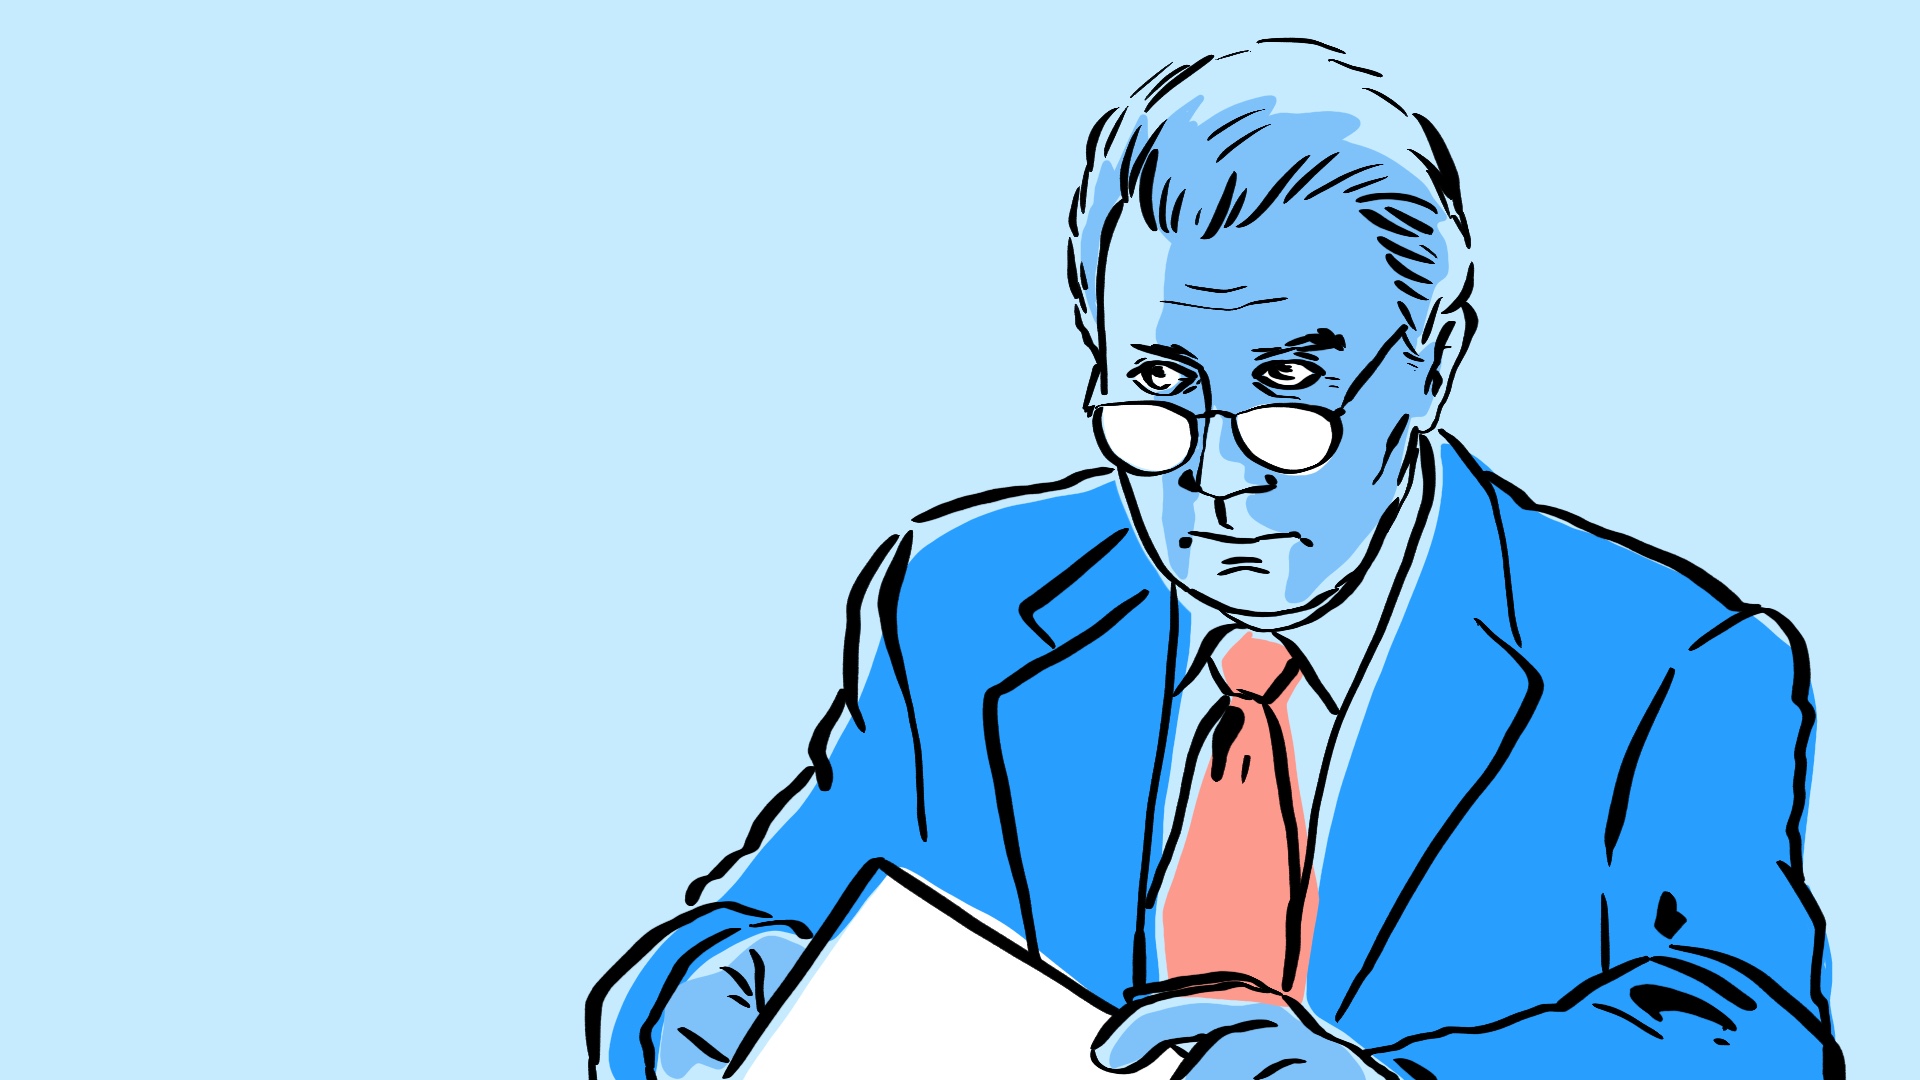 Illustration of Jed Bartlet from The West Wing television show